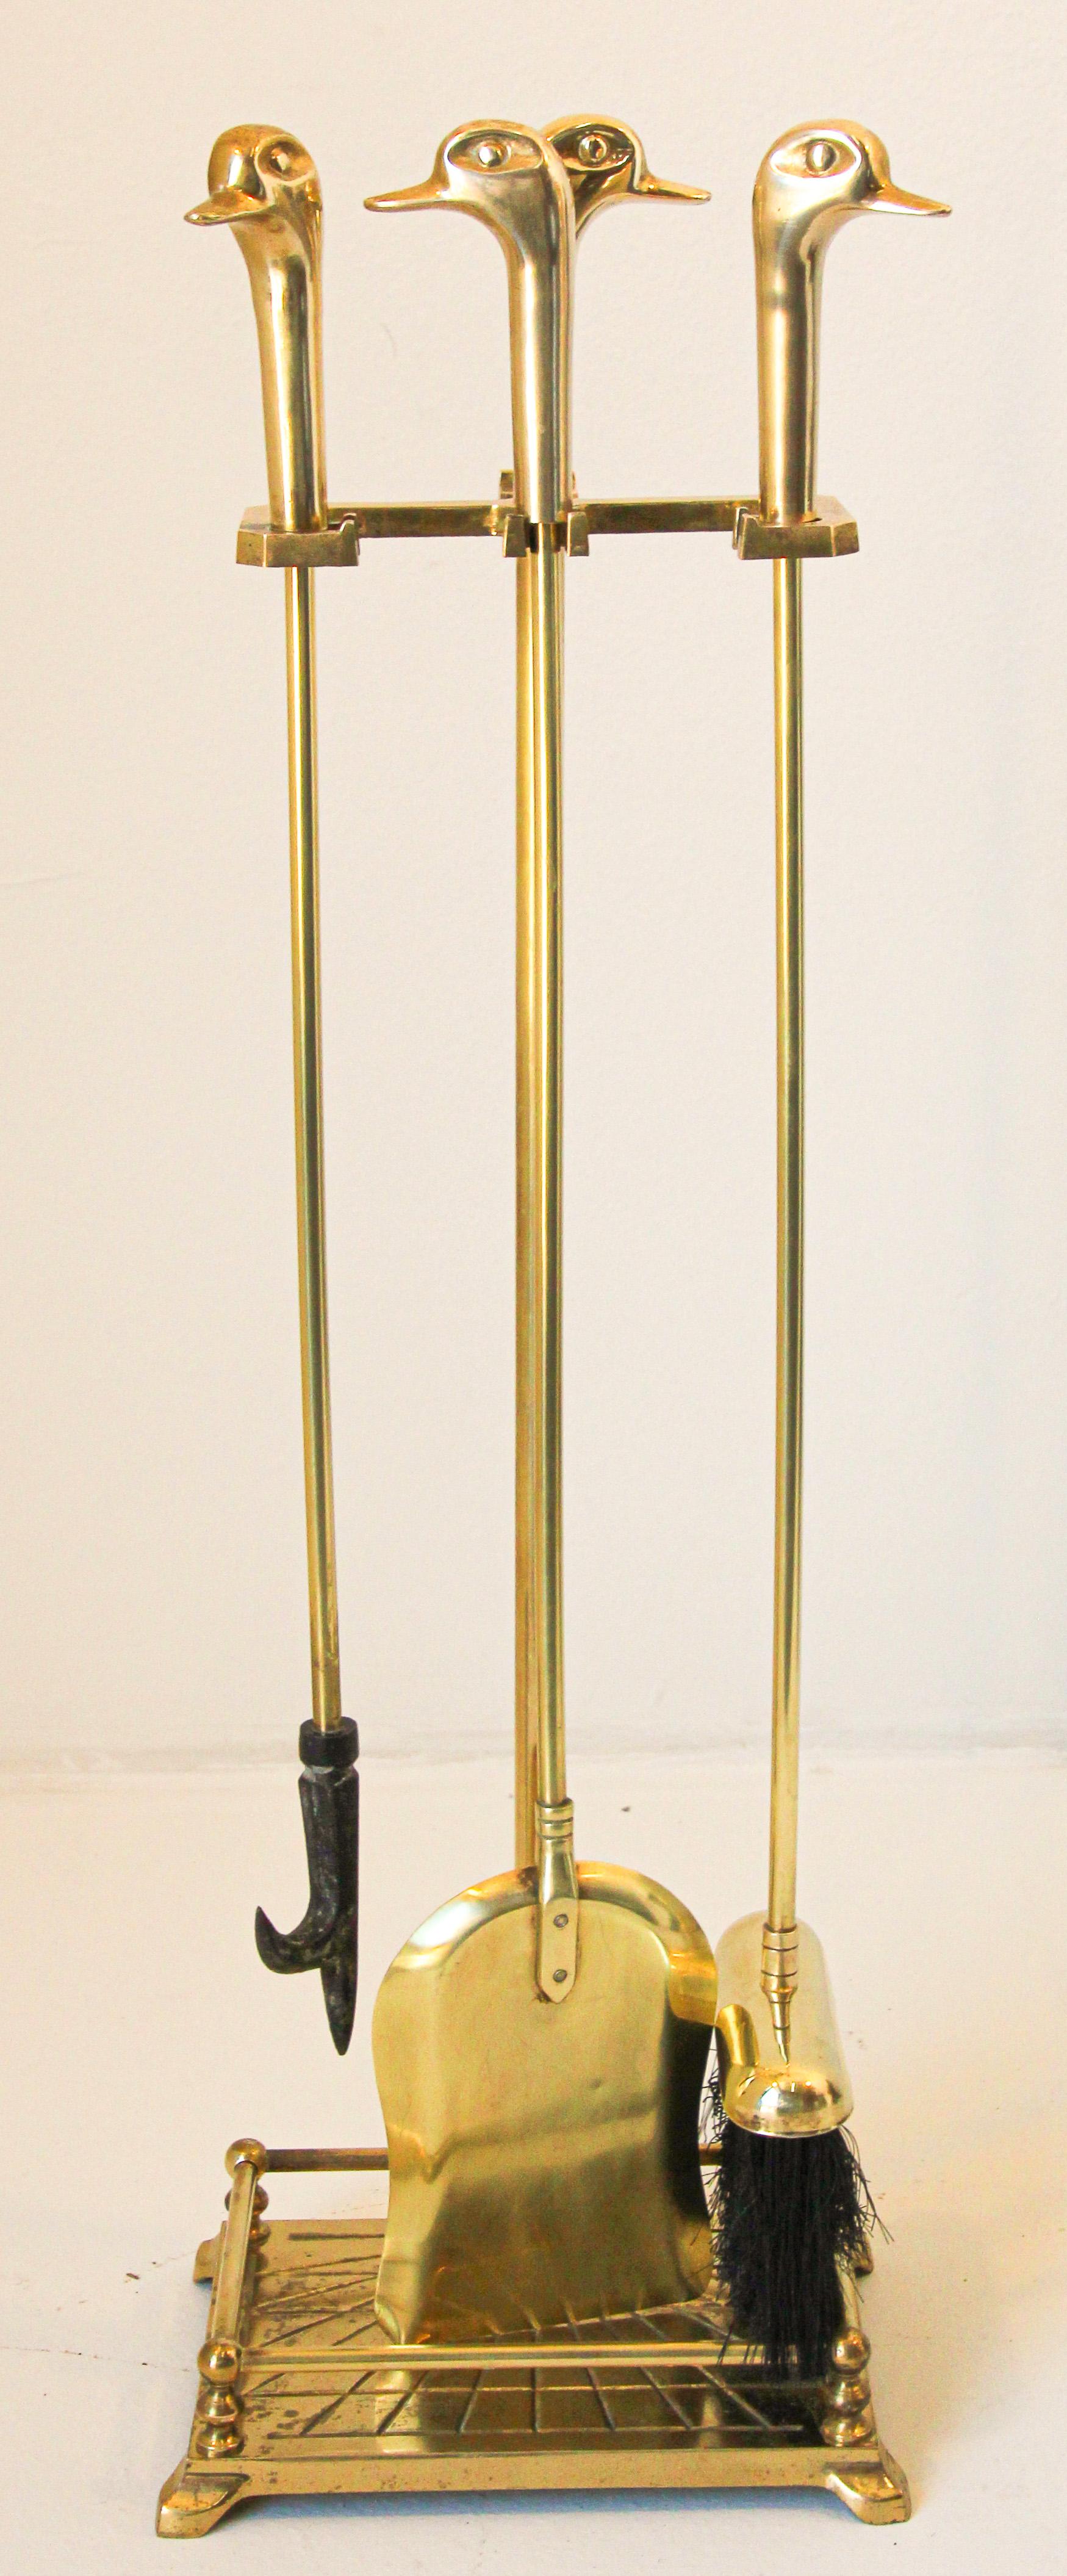 Vintage fireplace tools in brass with duck heads, French, circa 1960,
Five-pieces, fire tool set features a brass metal frame and three tools with duck head handles.
This set of brass fire-tools, includes broom, shovel and poker on elaborate stand